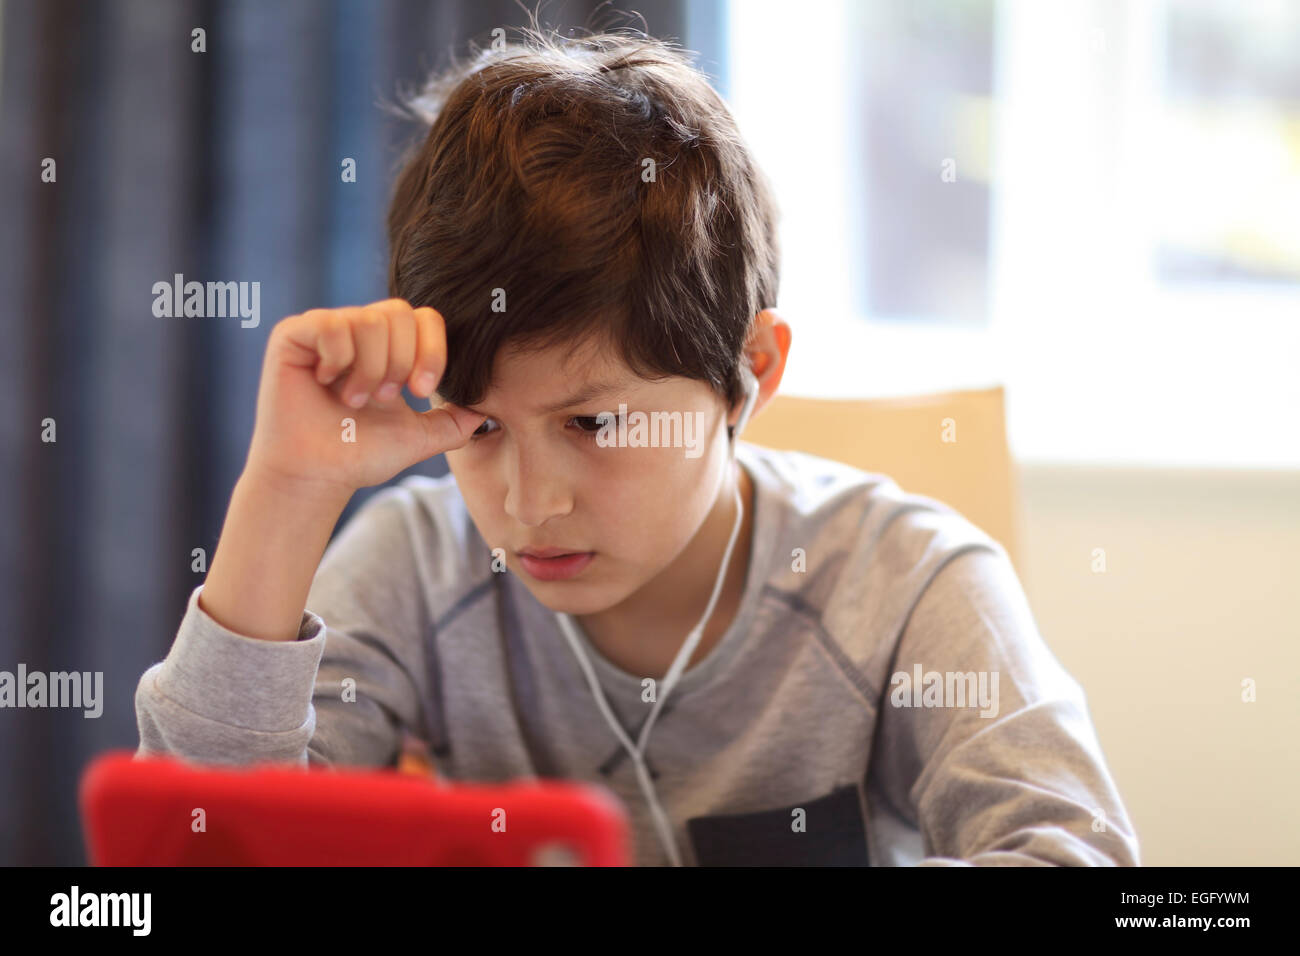 Serious young boy playing with tablet computer Stock Photo